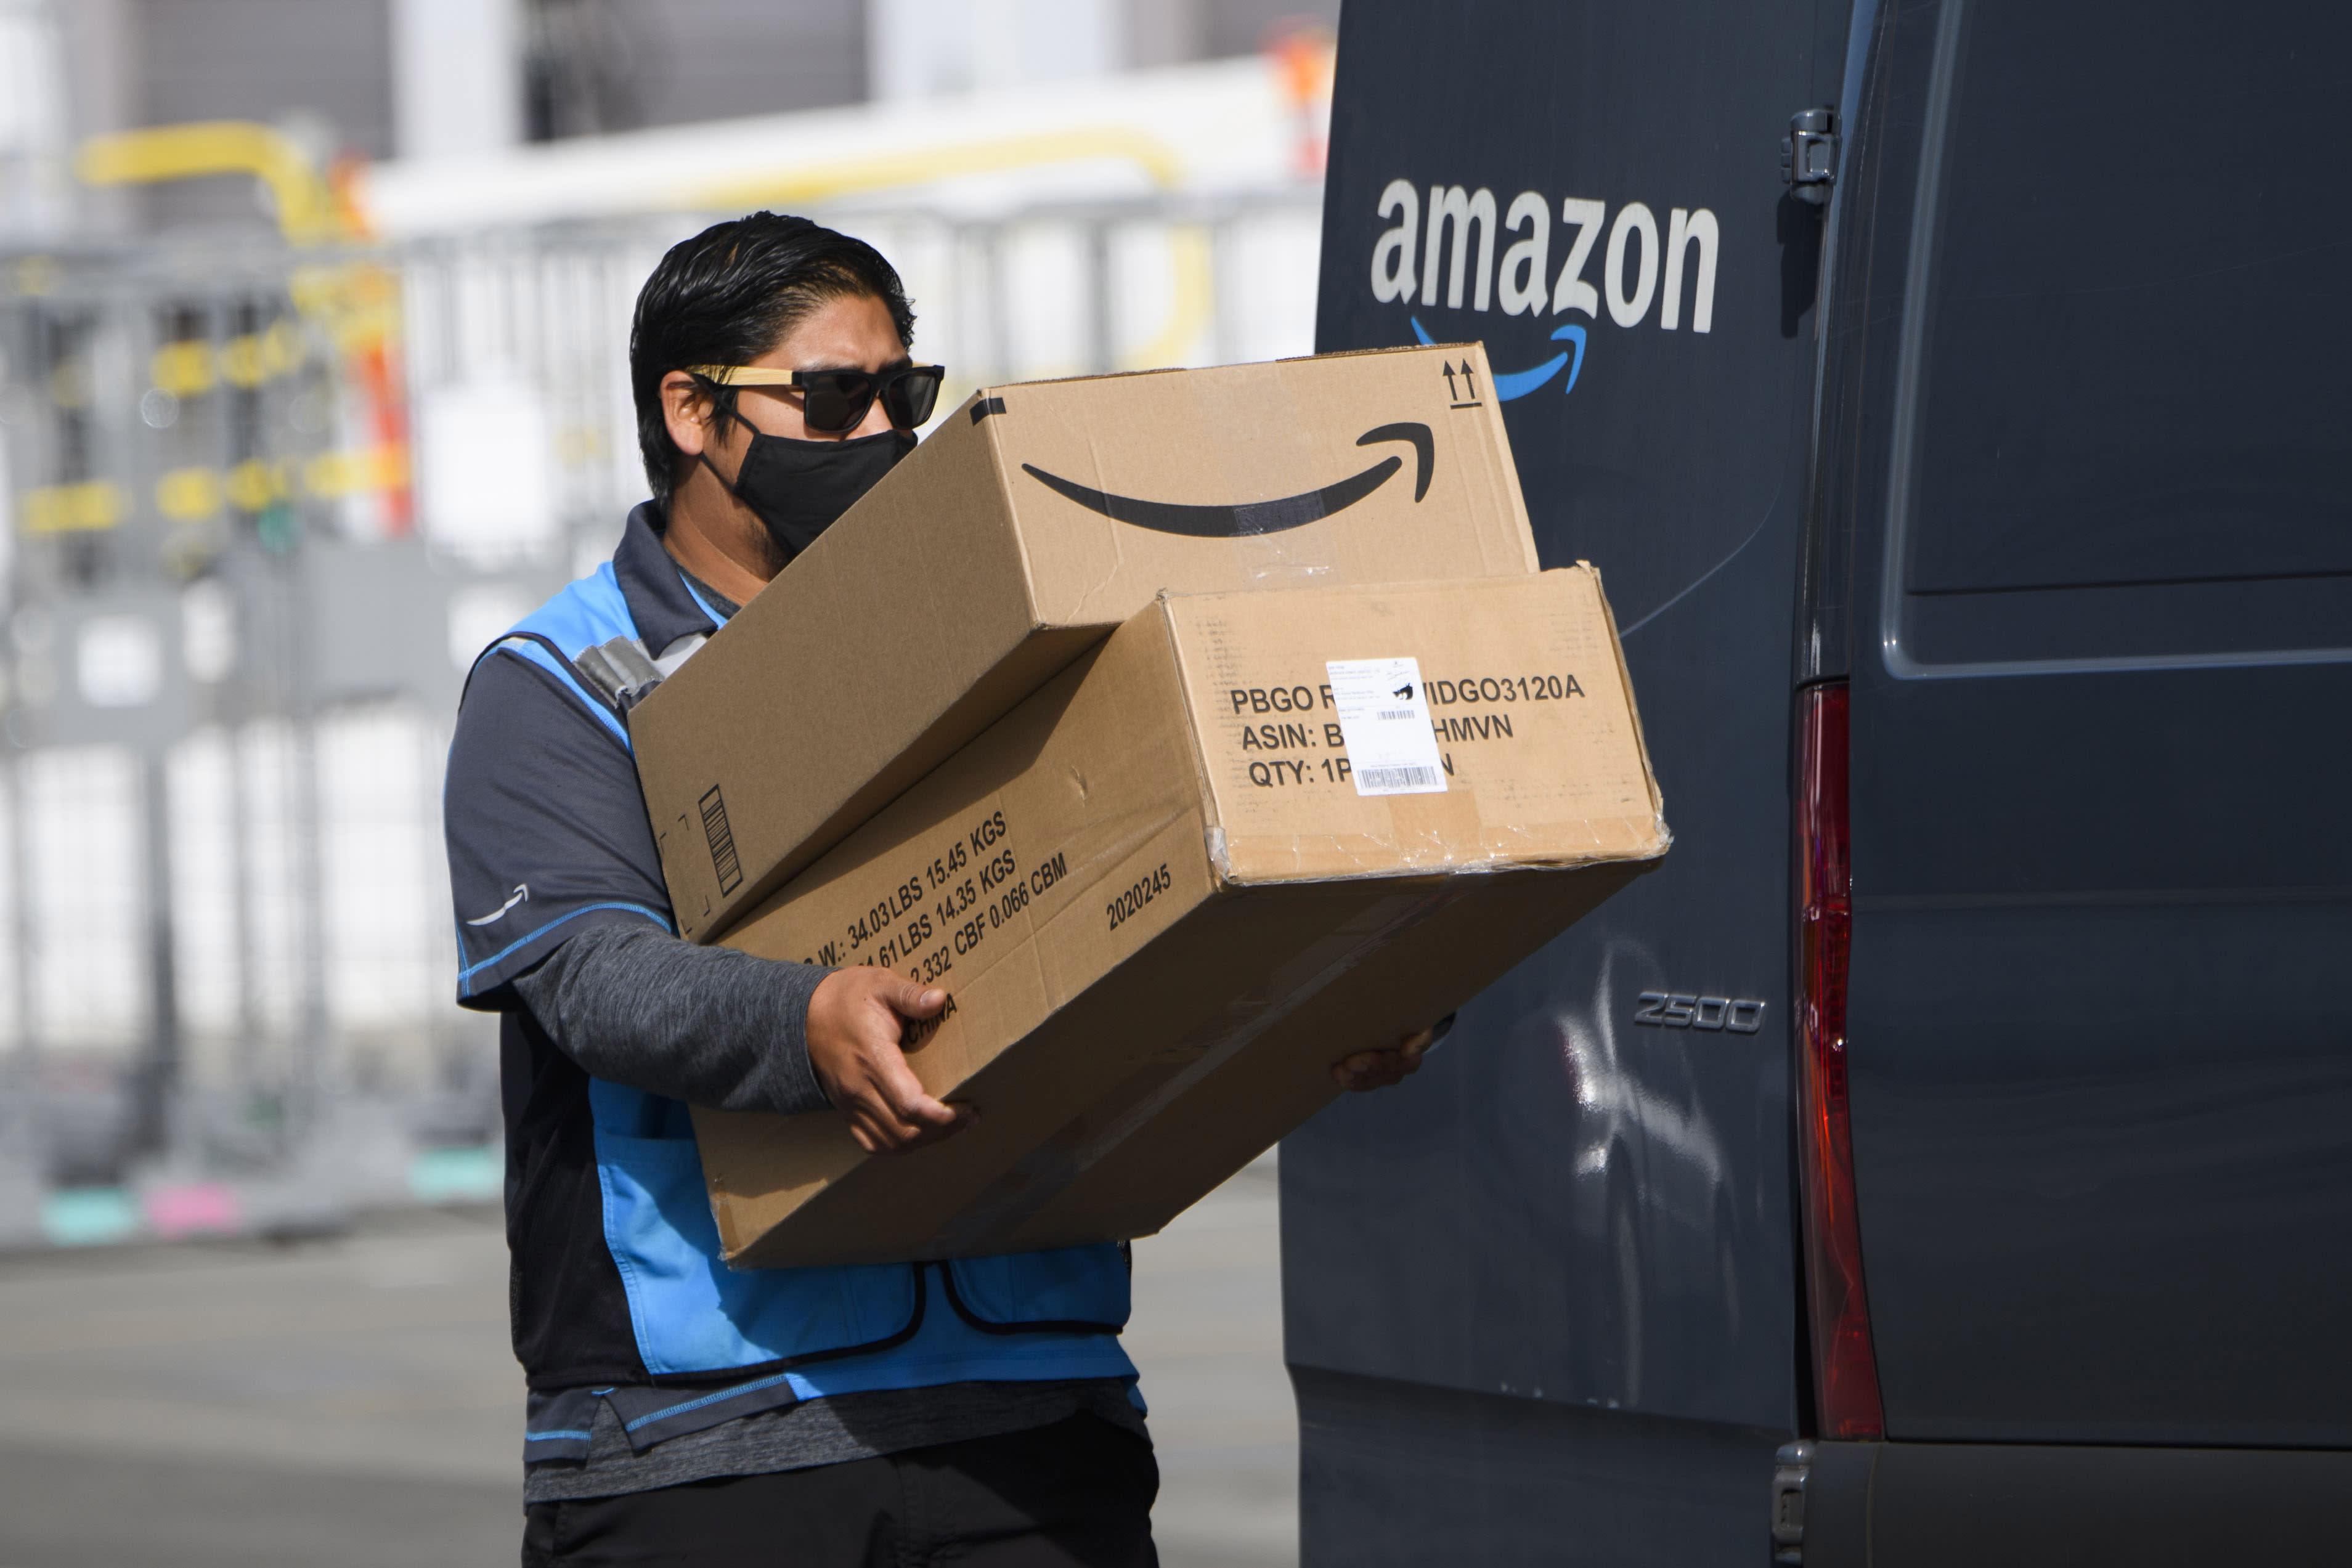 Amazon using AI-equipped cameras in delivery vans